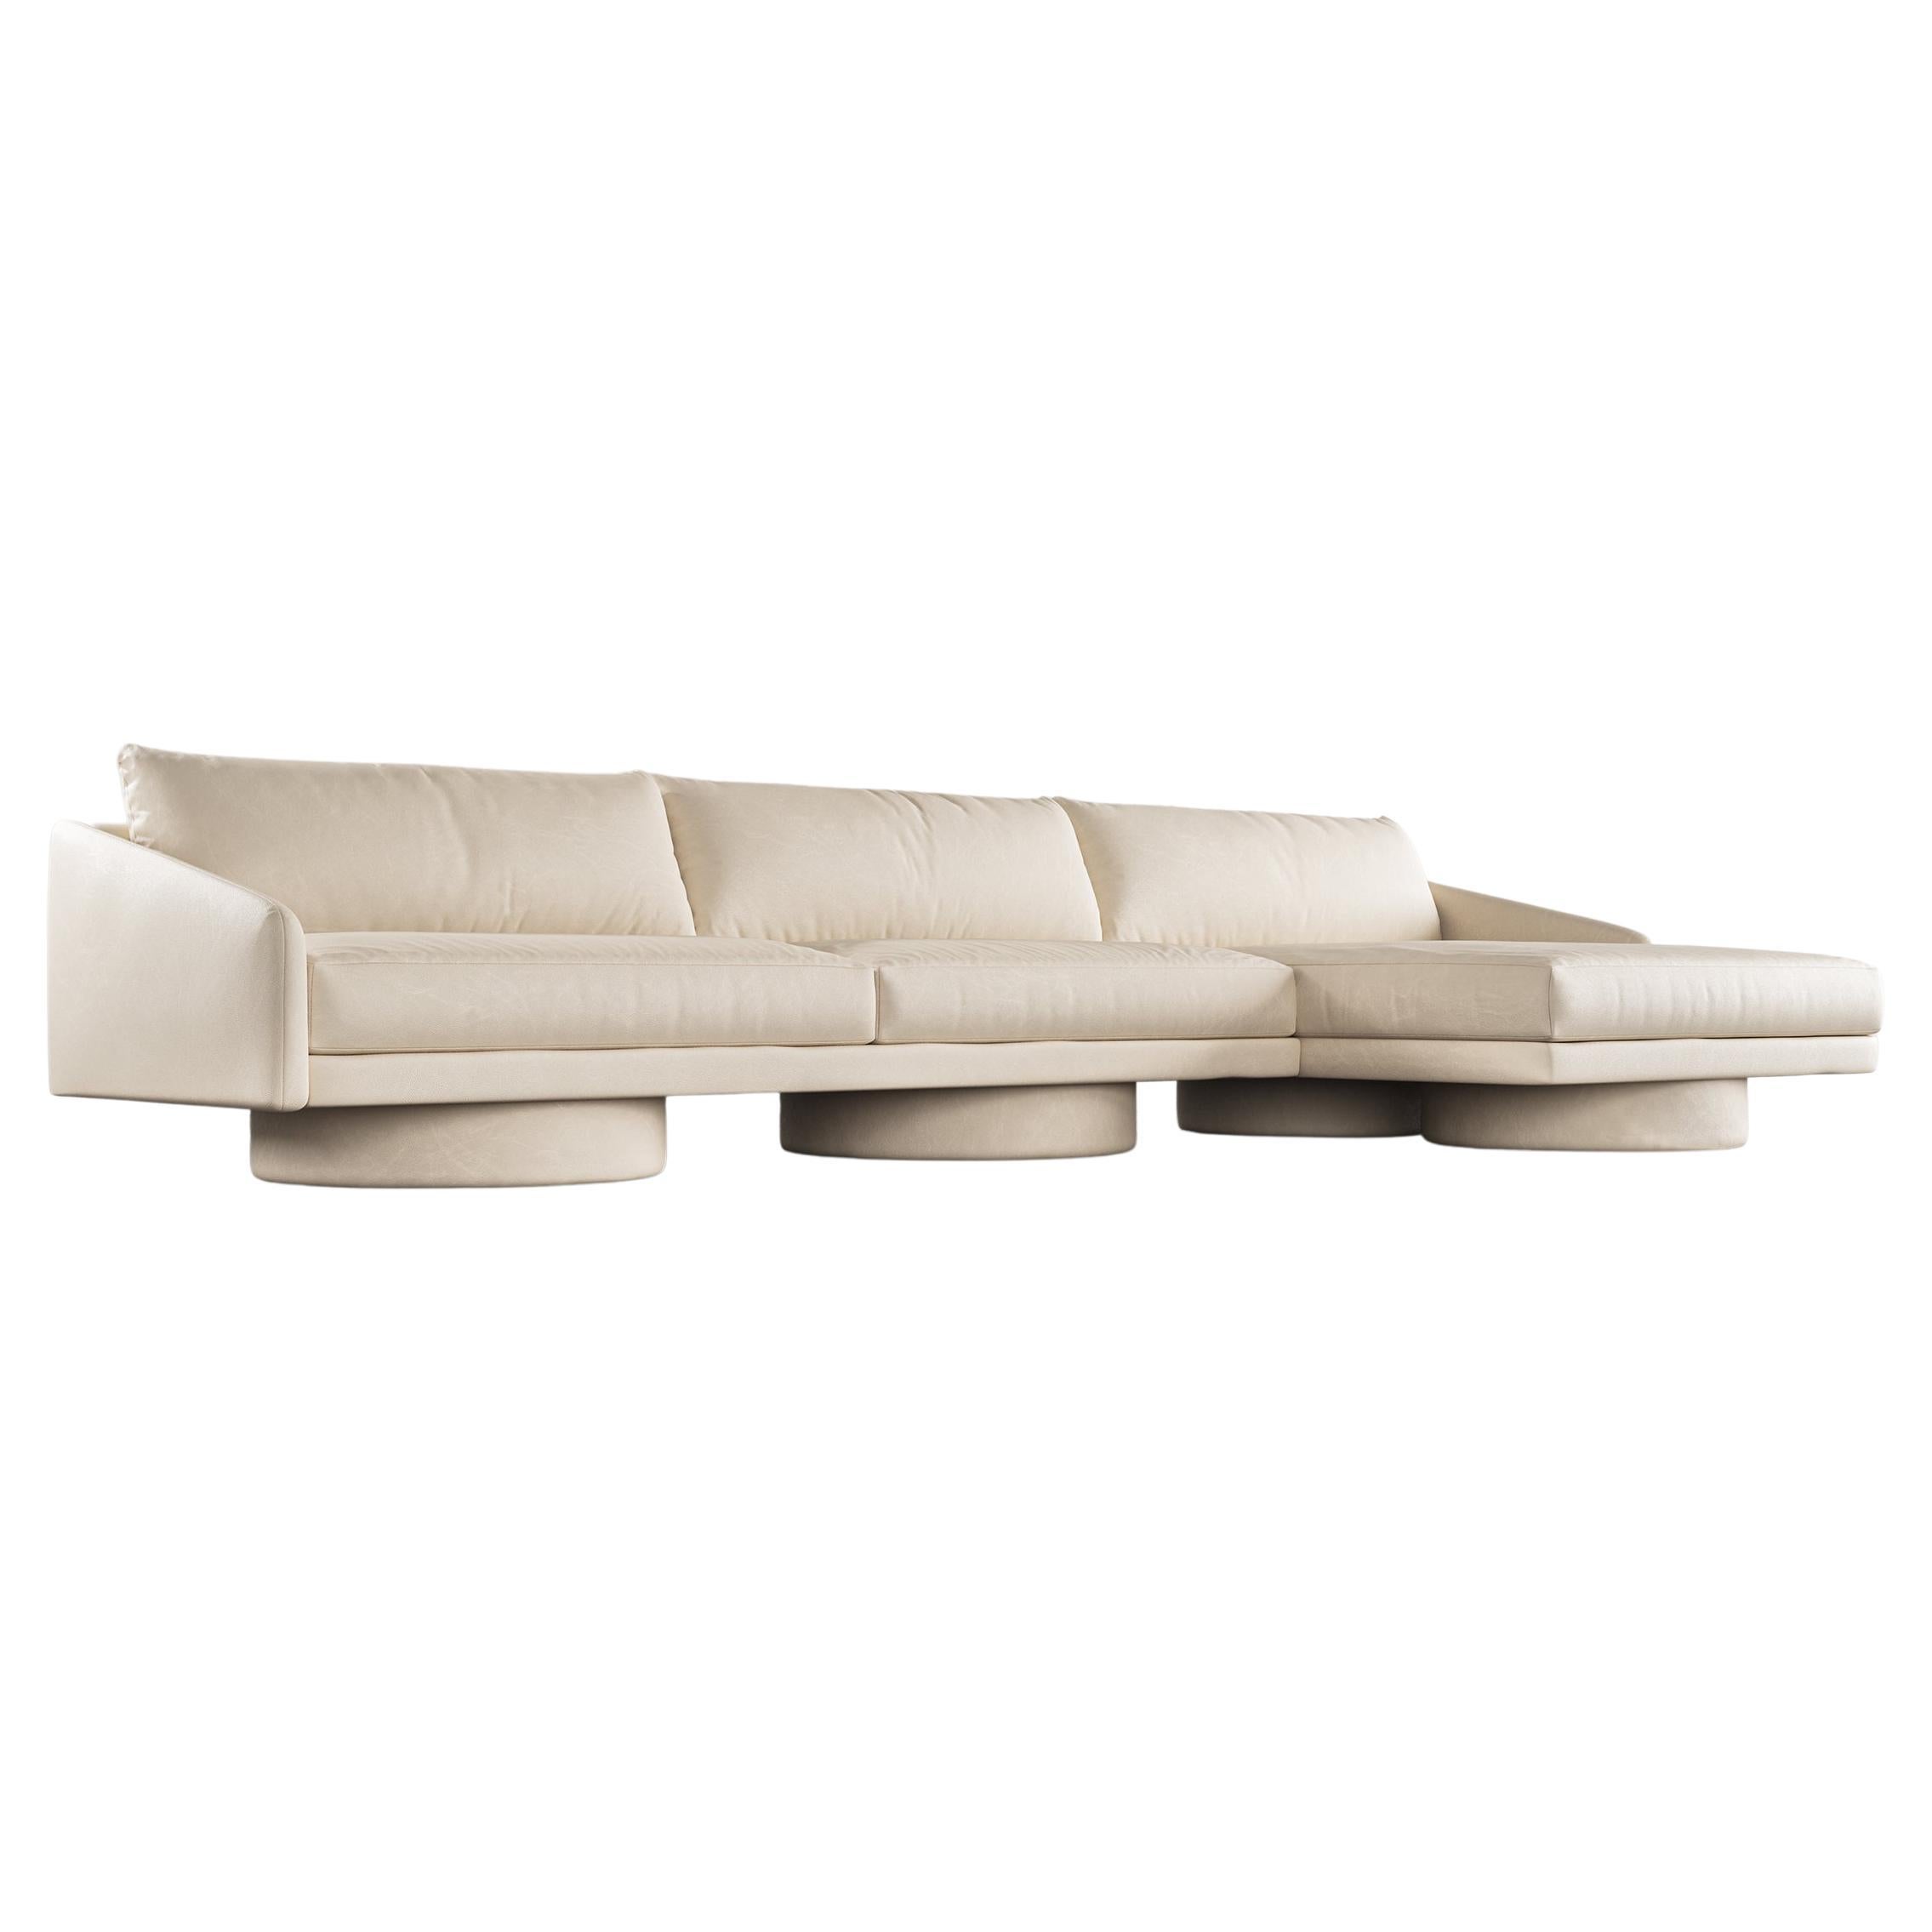 SURGE SECTIONAL - Modern Sectional Sofa in Cream Faux Leather For Sale